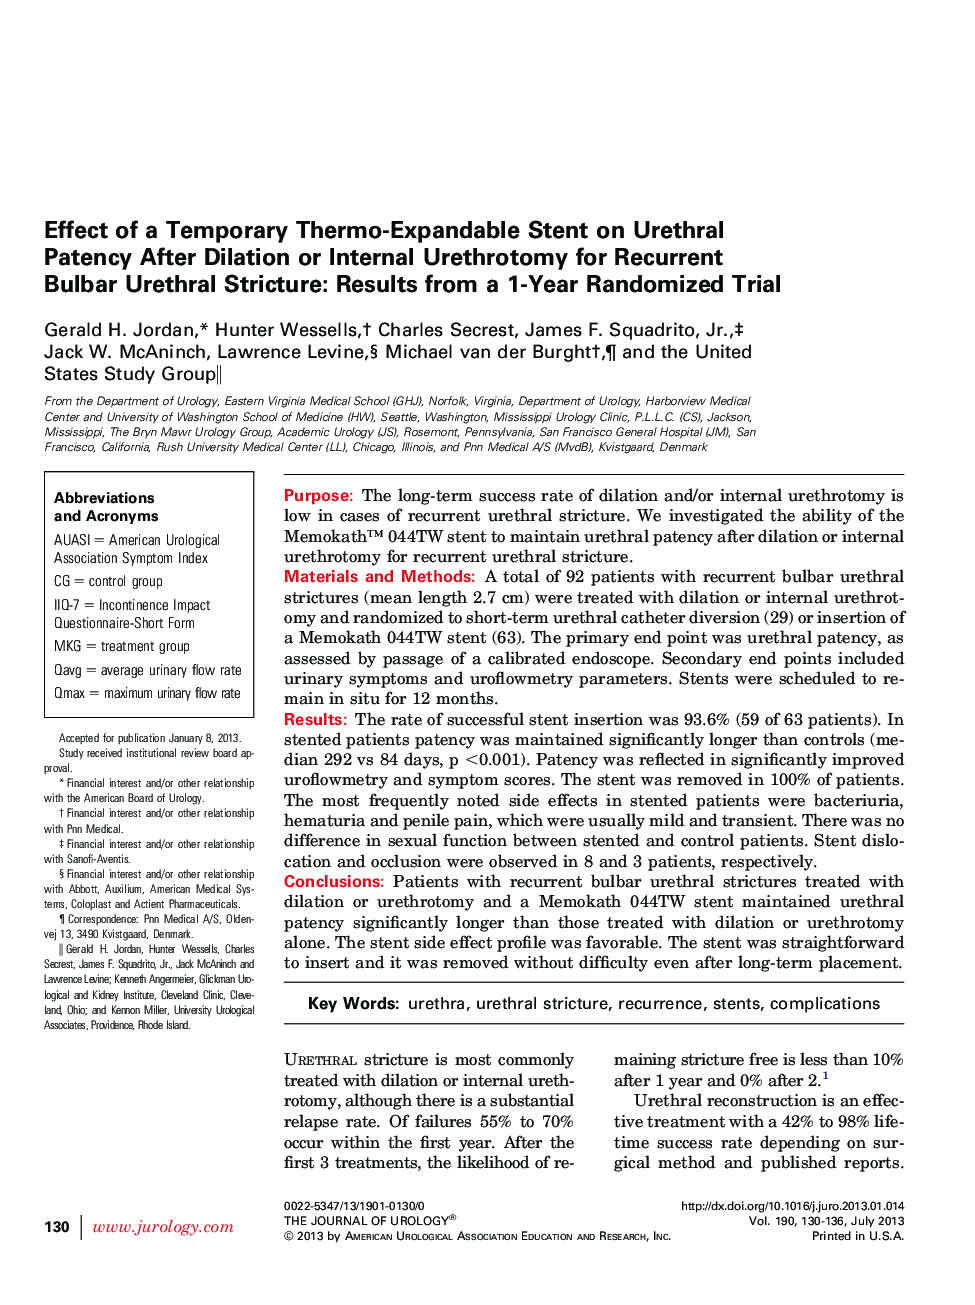 Effect of a Temporary Thermo-Expandable Stent on Urethral Patency After Dilation or Internal Urethrotomy for Recurrent Bulbar Urethral Stricture: Results from a 1-Year Randomized Trial 